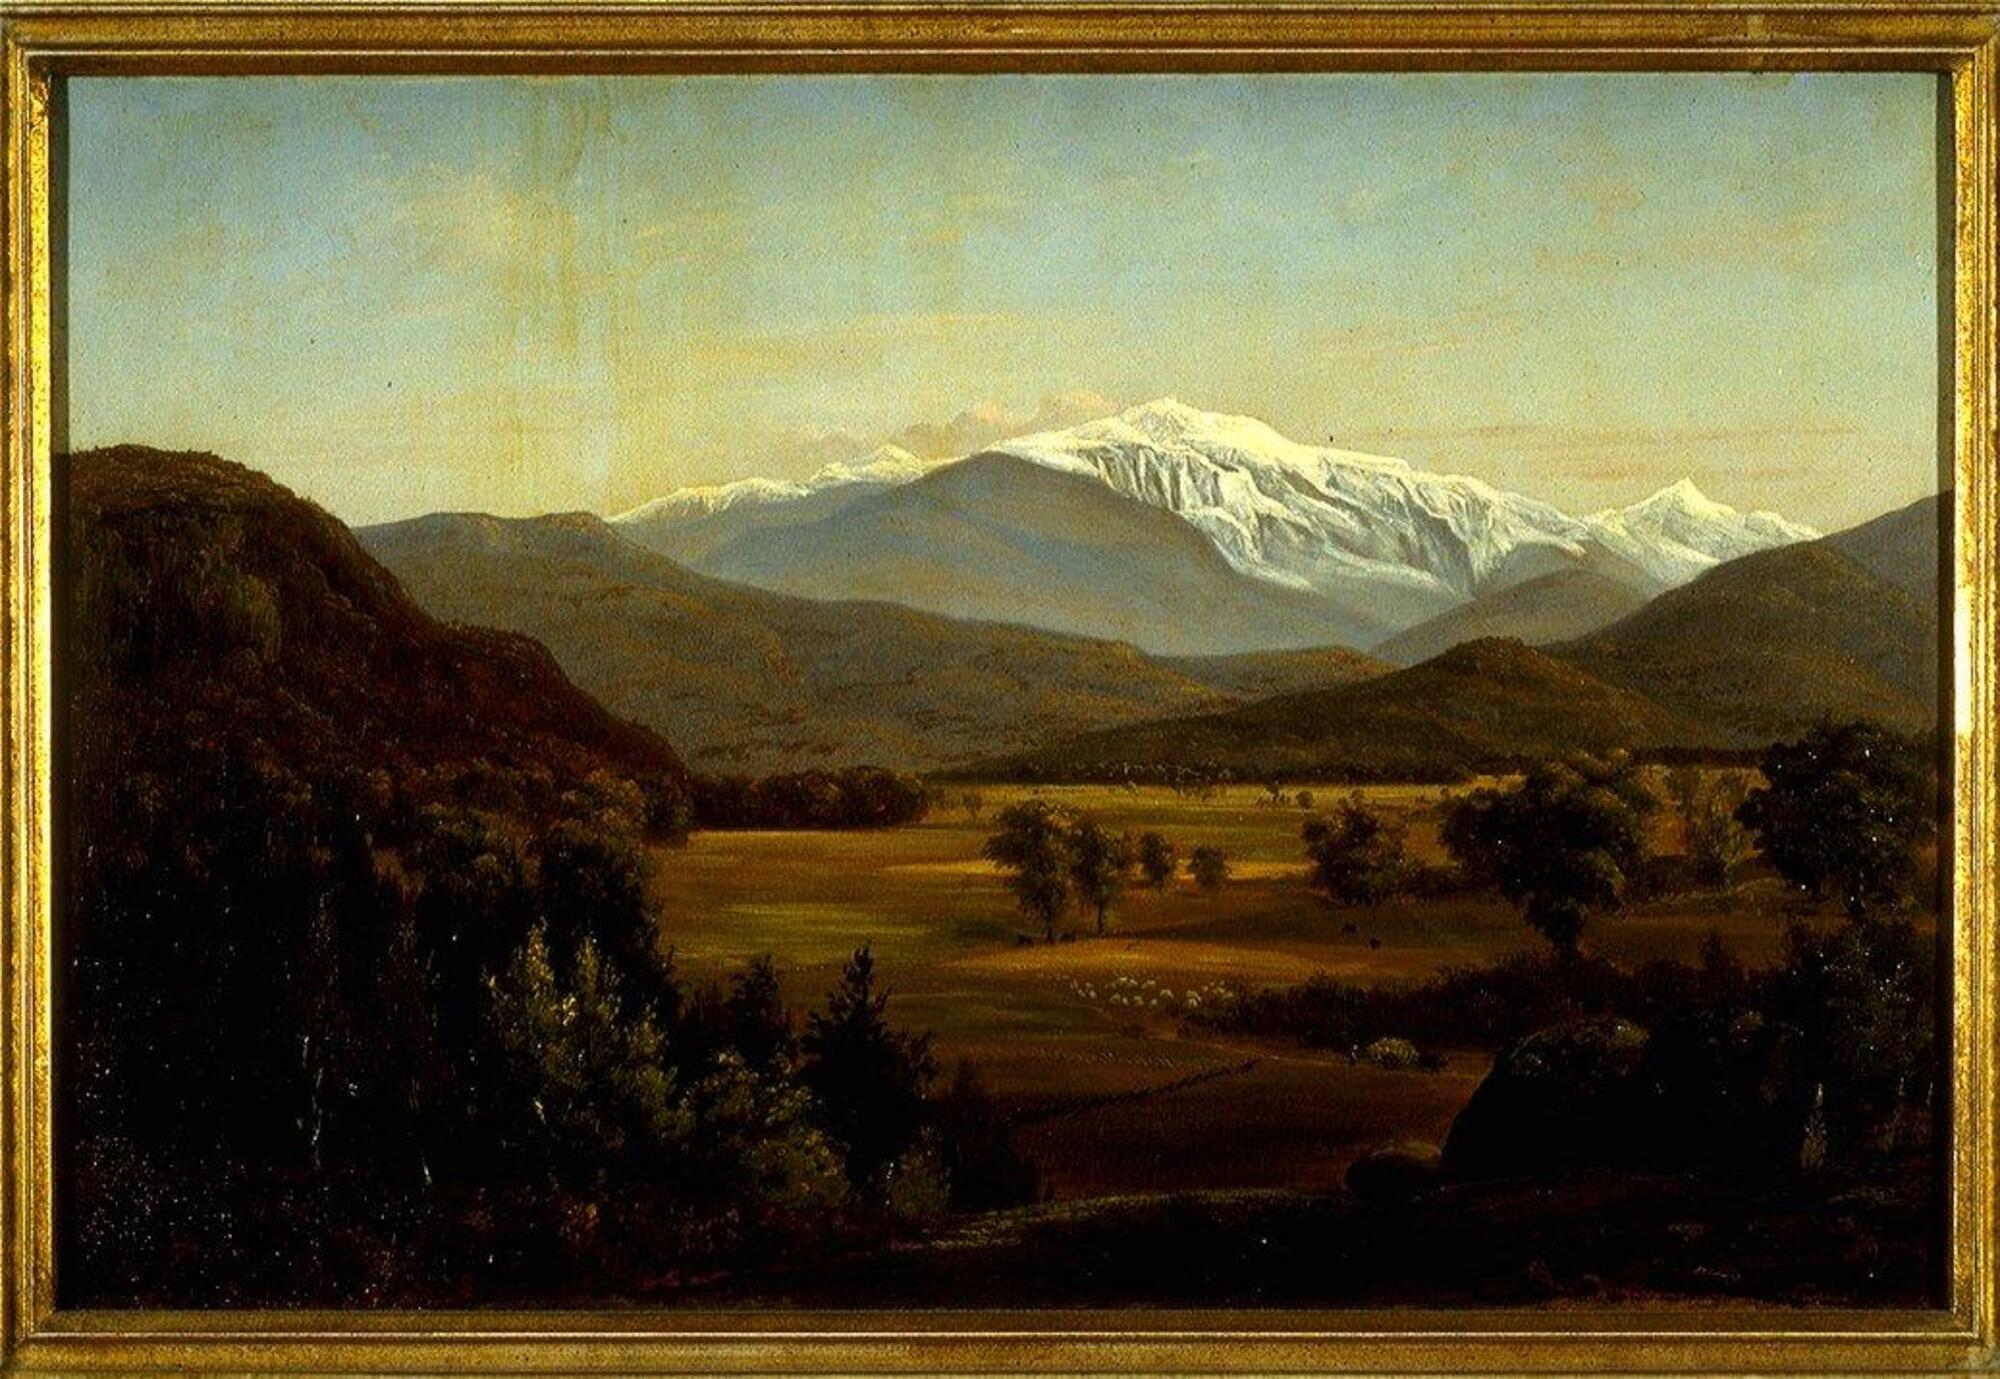 Landscape with trees in foreground, valley in middle ground dotted with minute figures of sheep and a farmer with a team of oxen pulling well-filled haywain. Mountains in distance with a snow-capped mountain in center background.